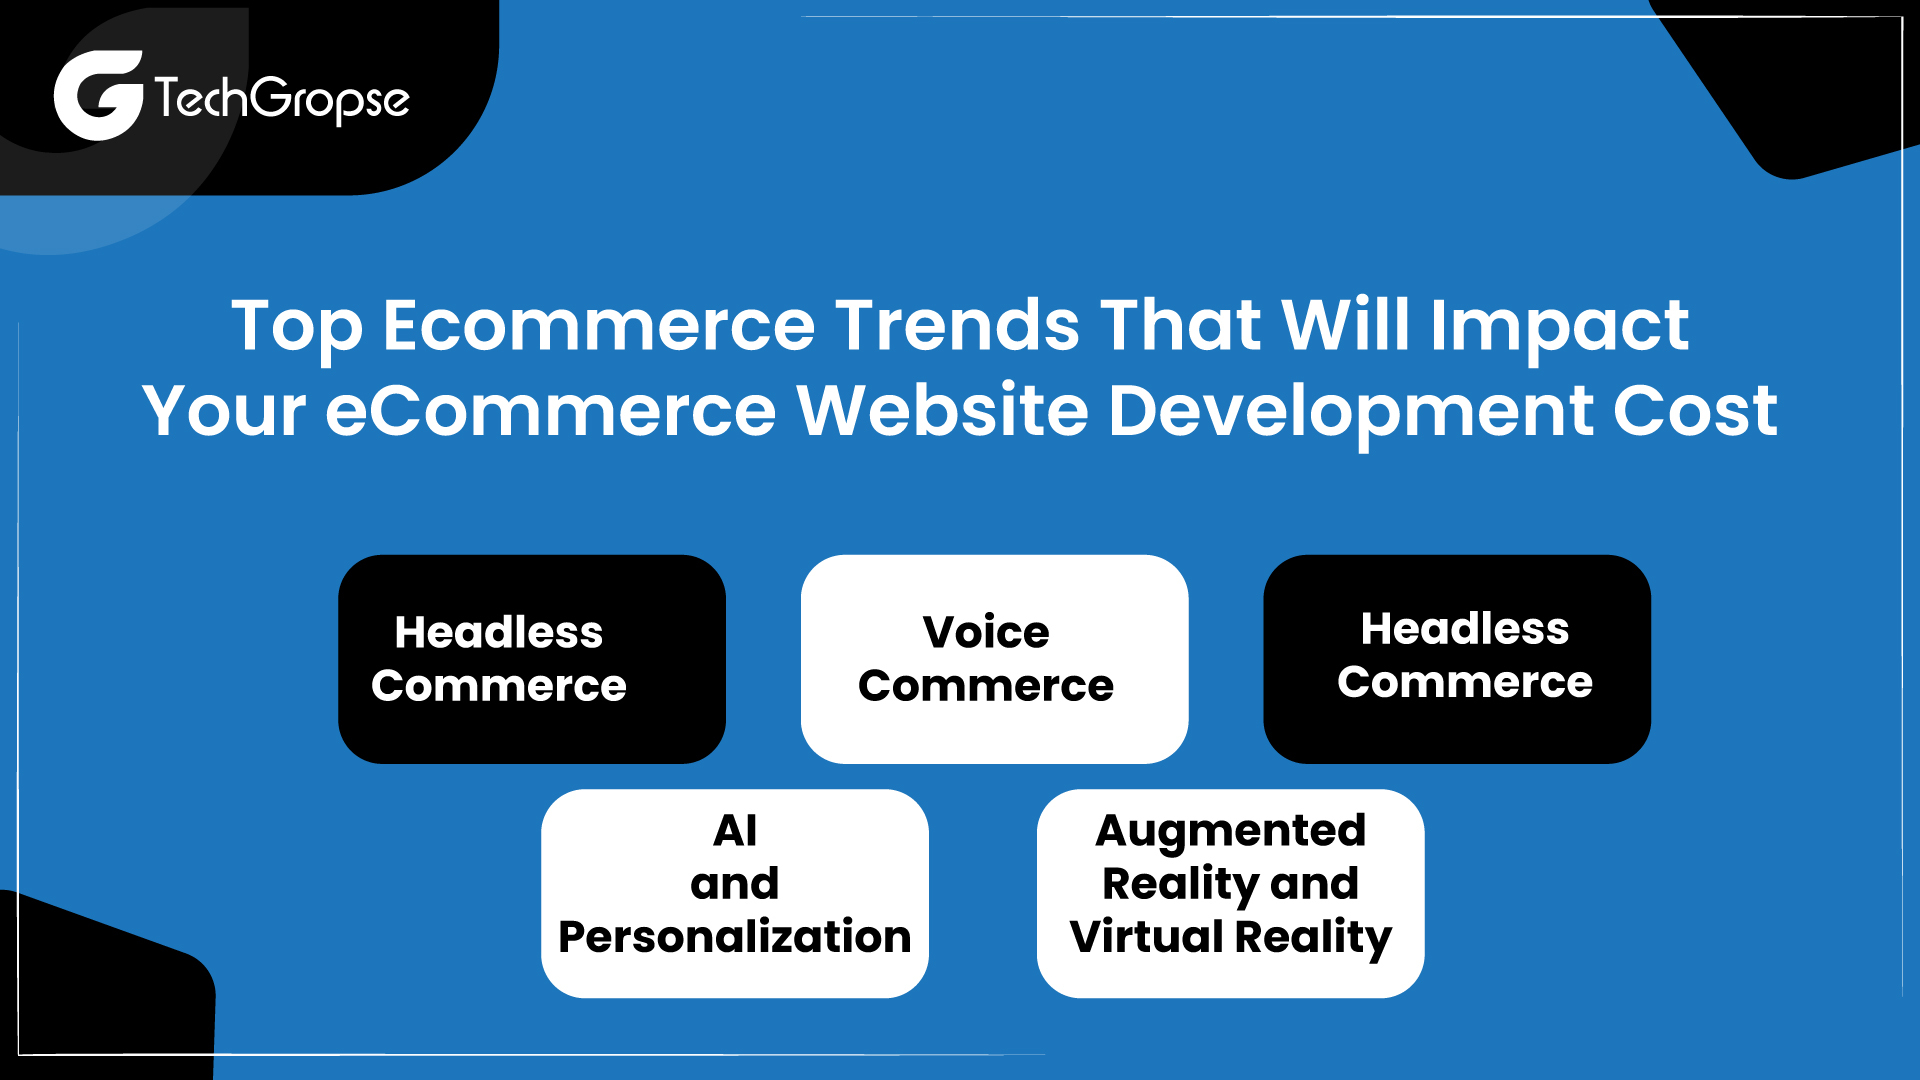 Look at the Top Ecommerce Trends That Will Impact Your eCommerce Website Development Cost